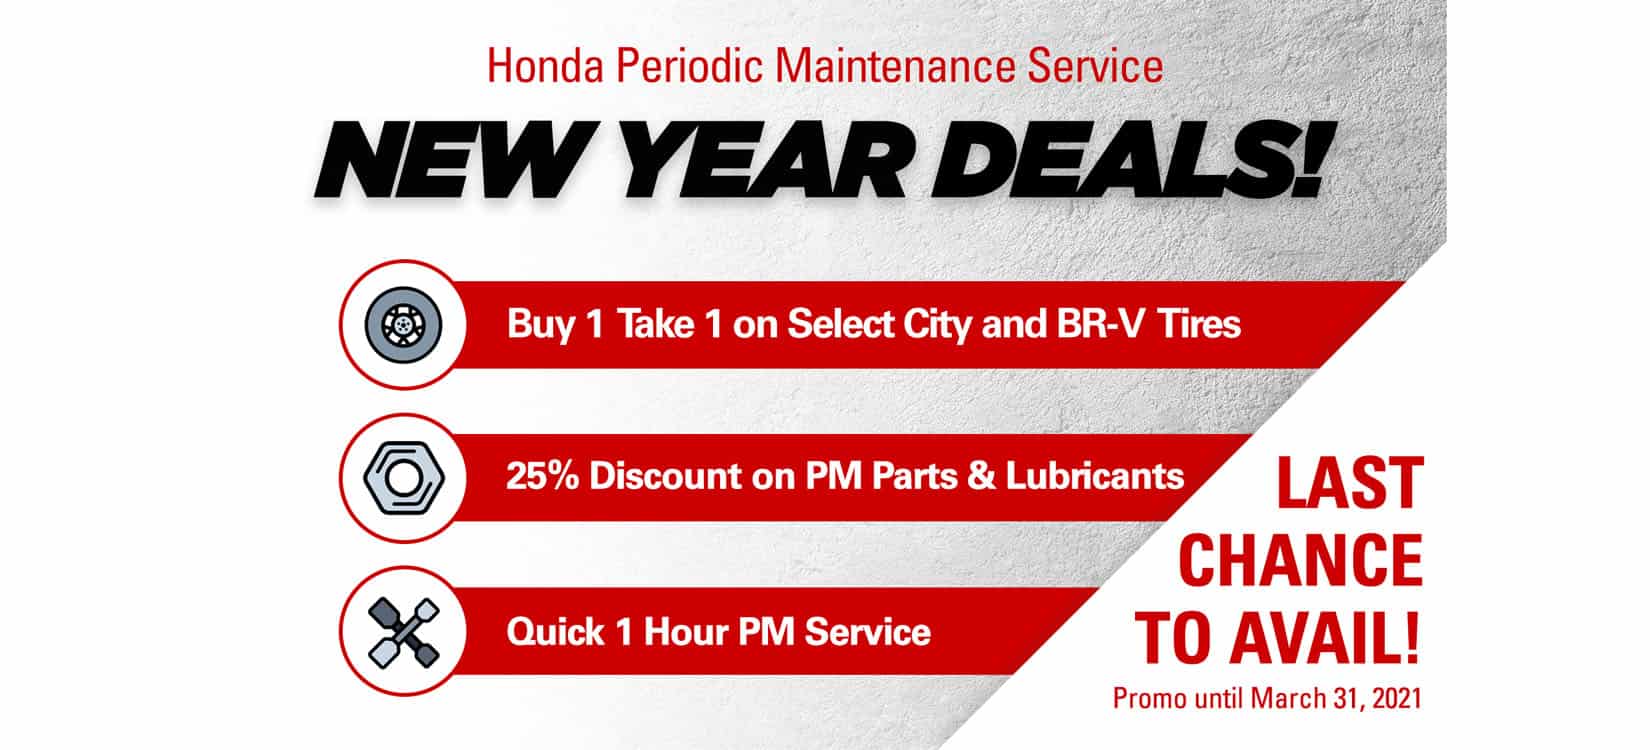 Last chance to avail Honda’s service deals and promos offerings until March 31